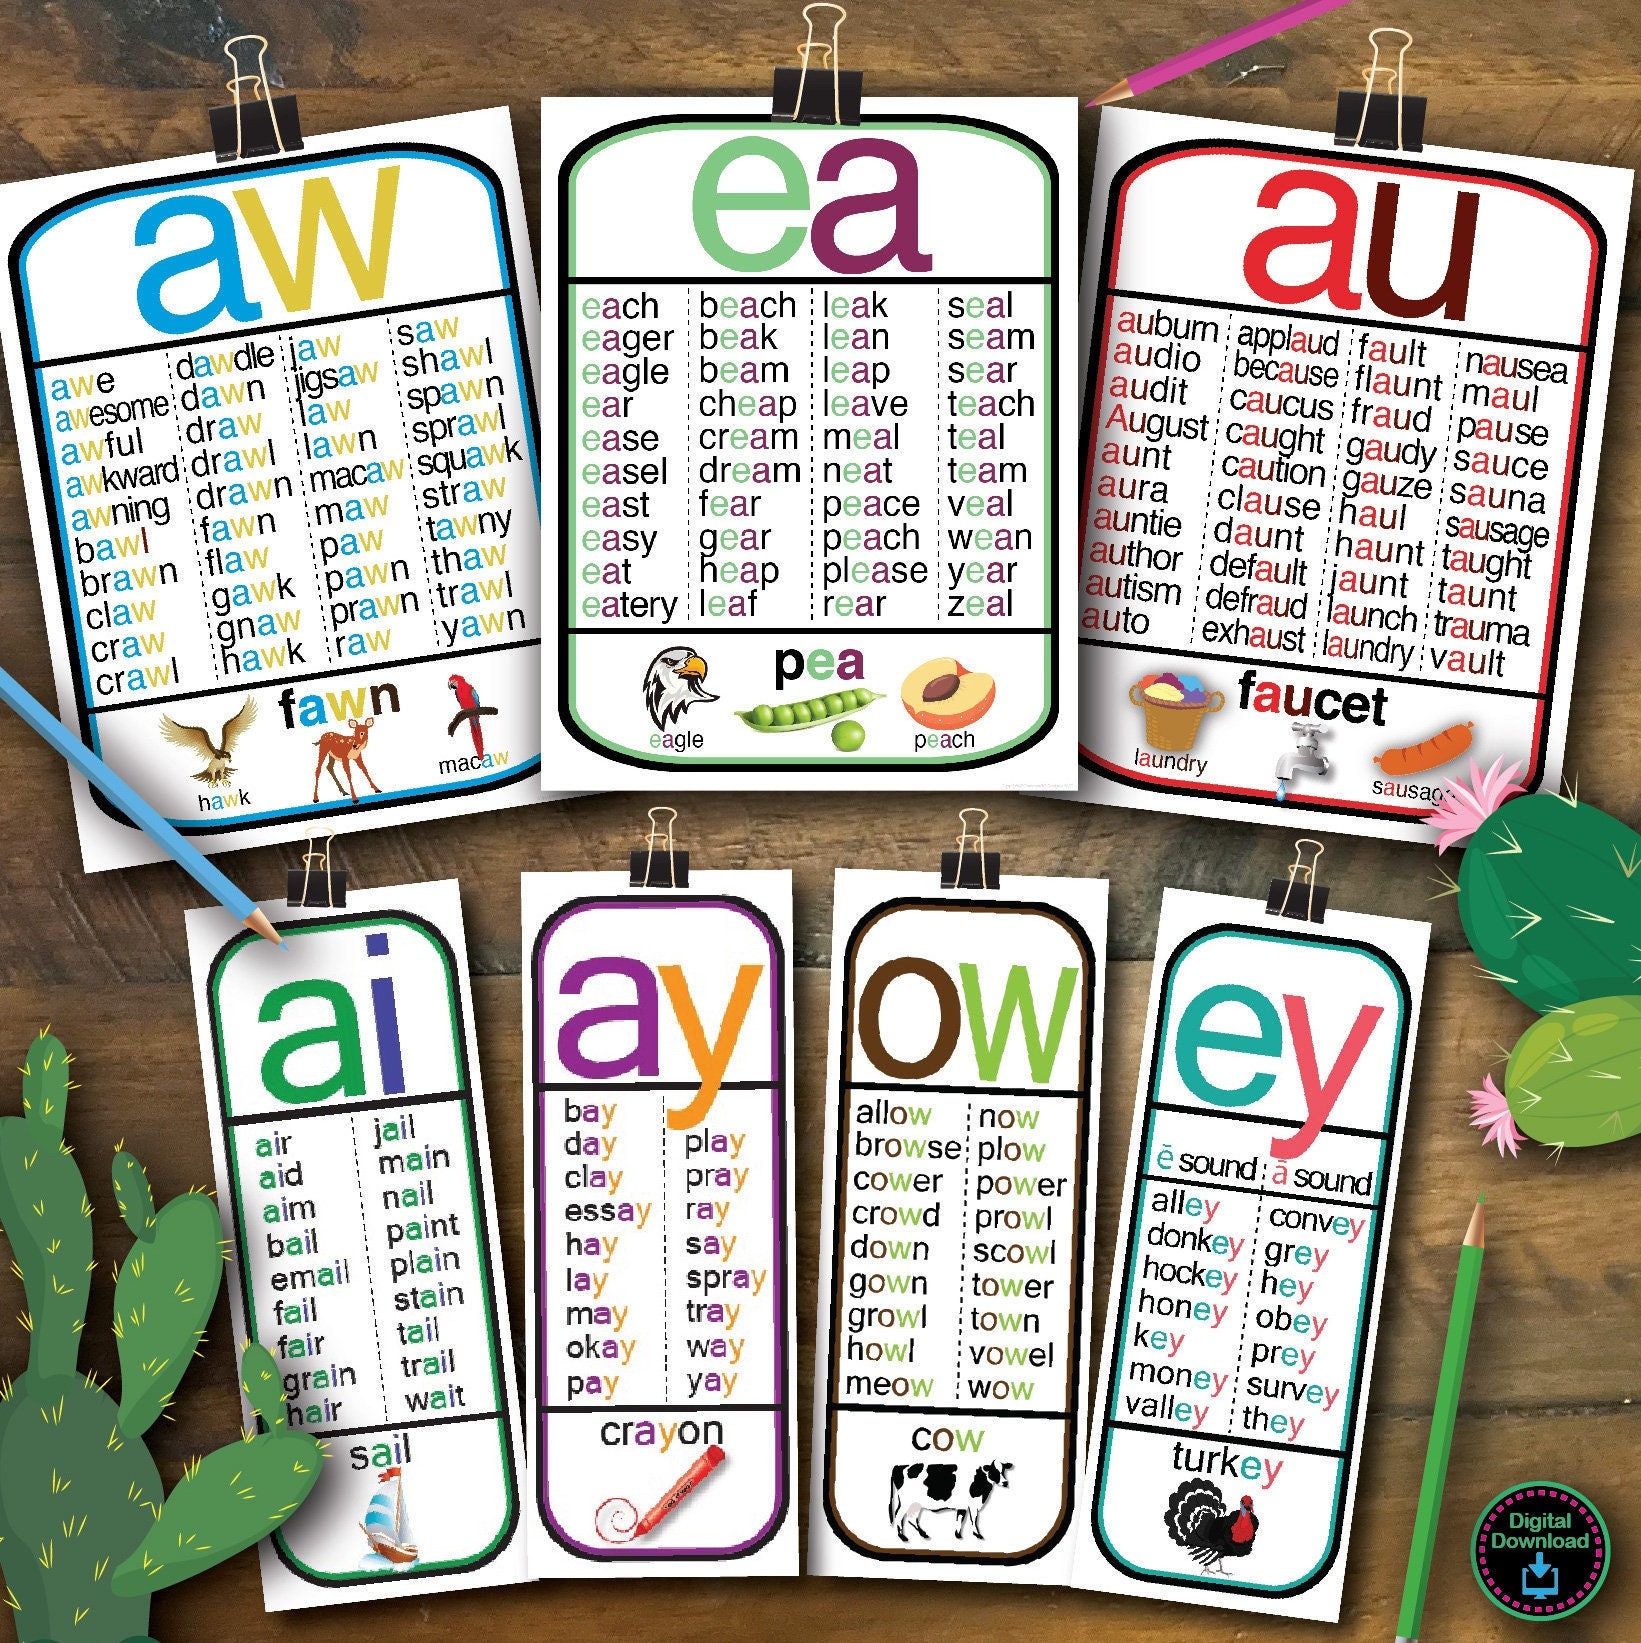 The Sound of aw - au / Phonics Mix! Paw, draw, yawn, pawn, August, launch,  applaud and sauce. 